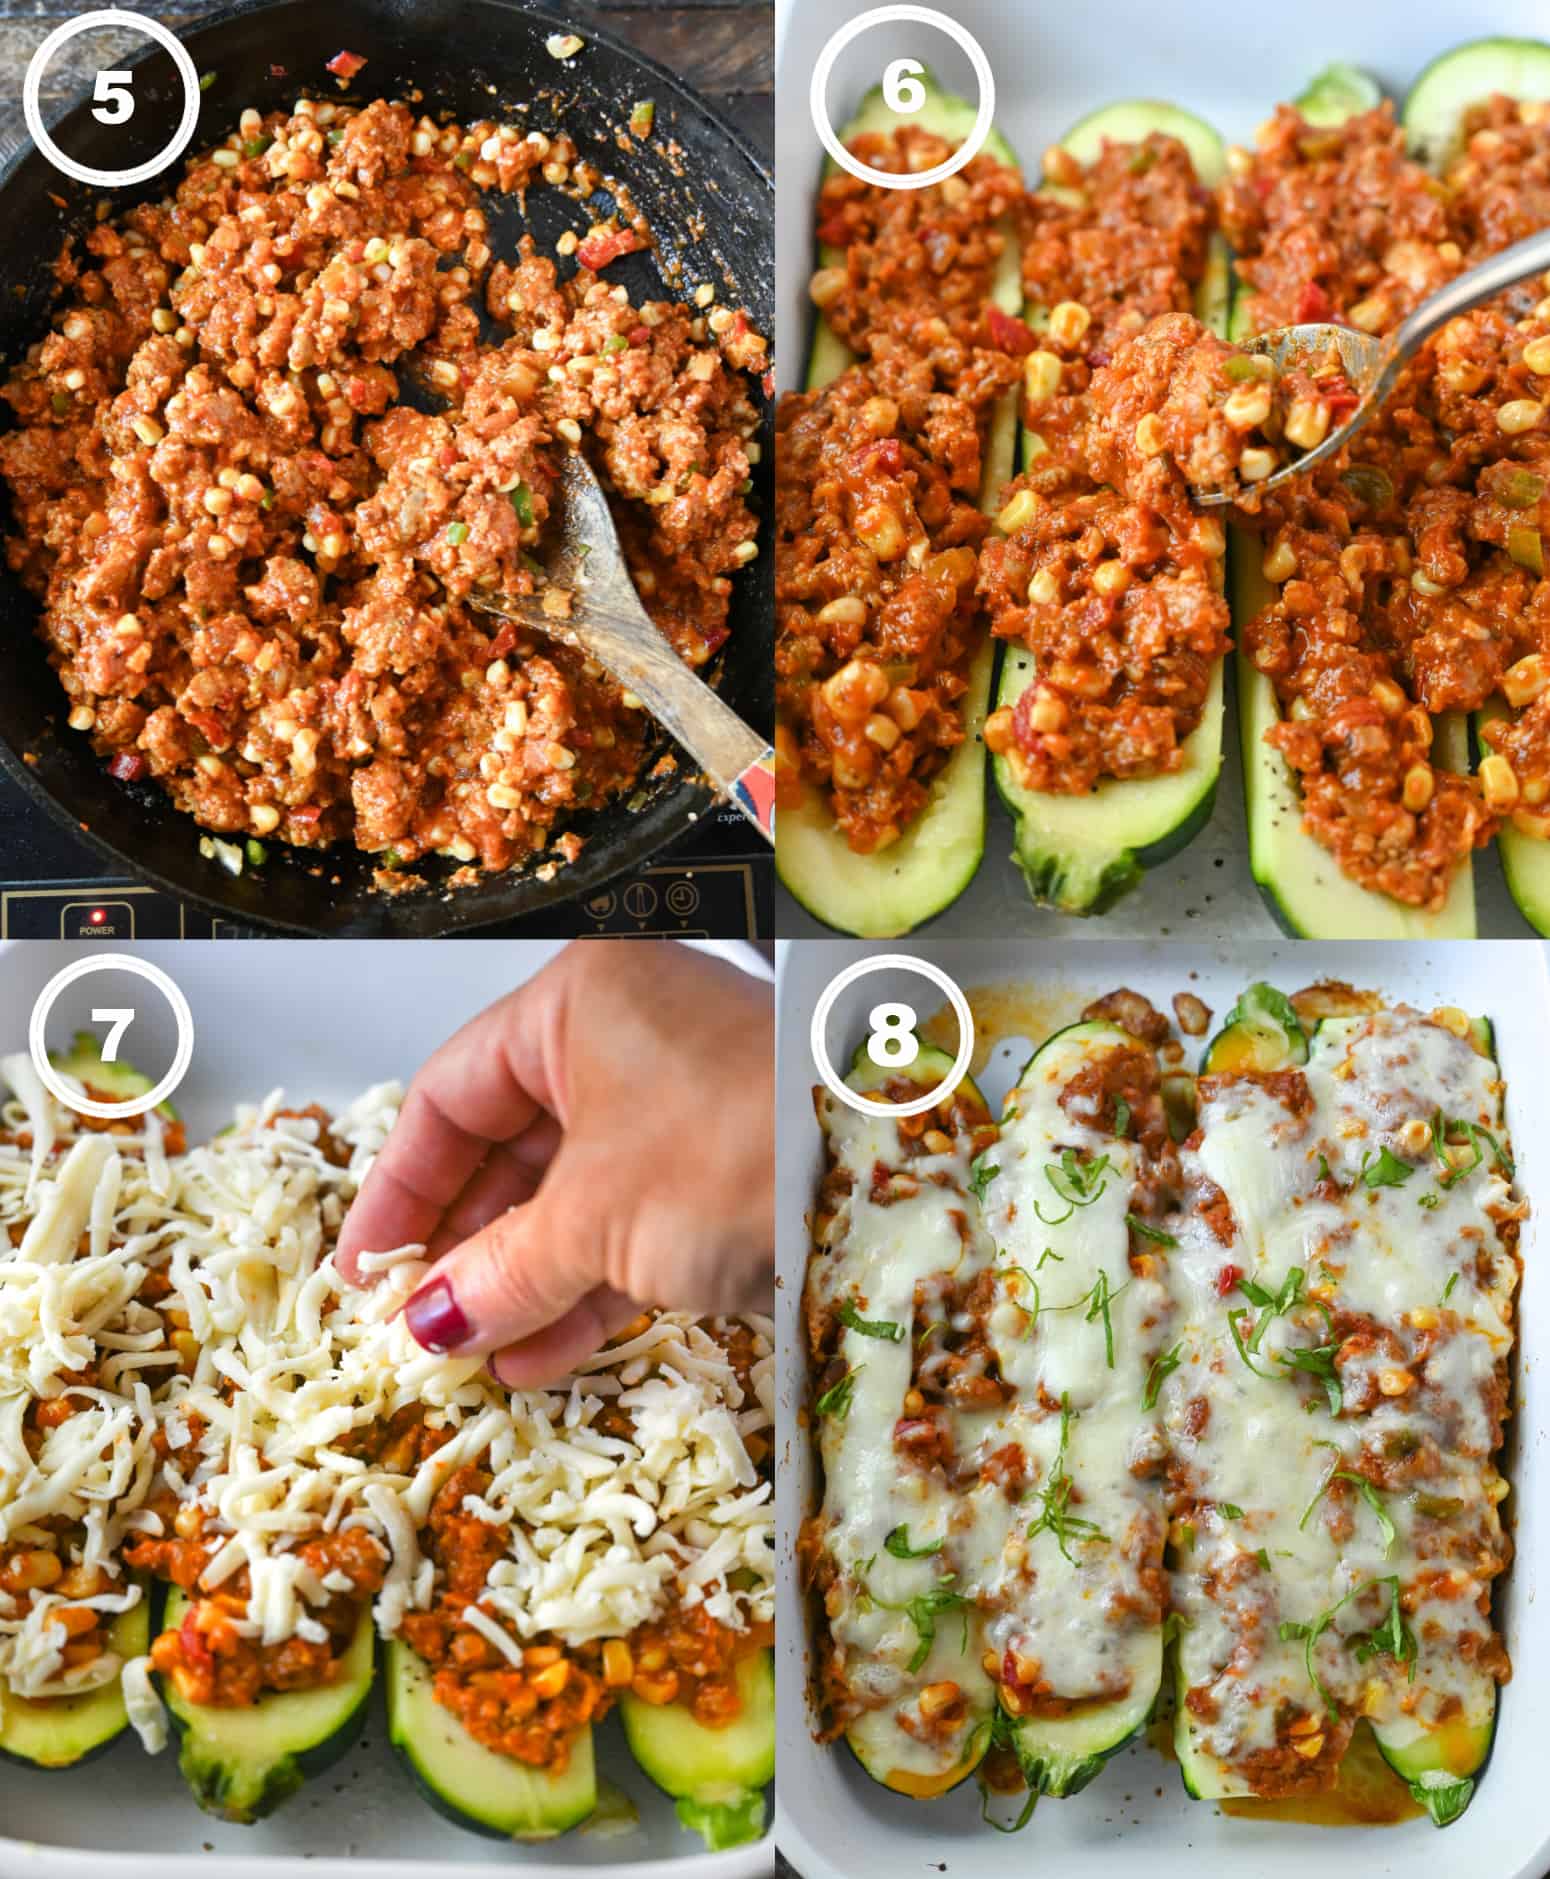 Four process photos. First one, browned sausage and peppers with added marinara sauce. Second one, meat mixture placed into the zucchini boats. Third one, mozzarella cheese being sprinkled on top. Fourth one, zucchini boats that have been baked in a white casserole dish.